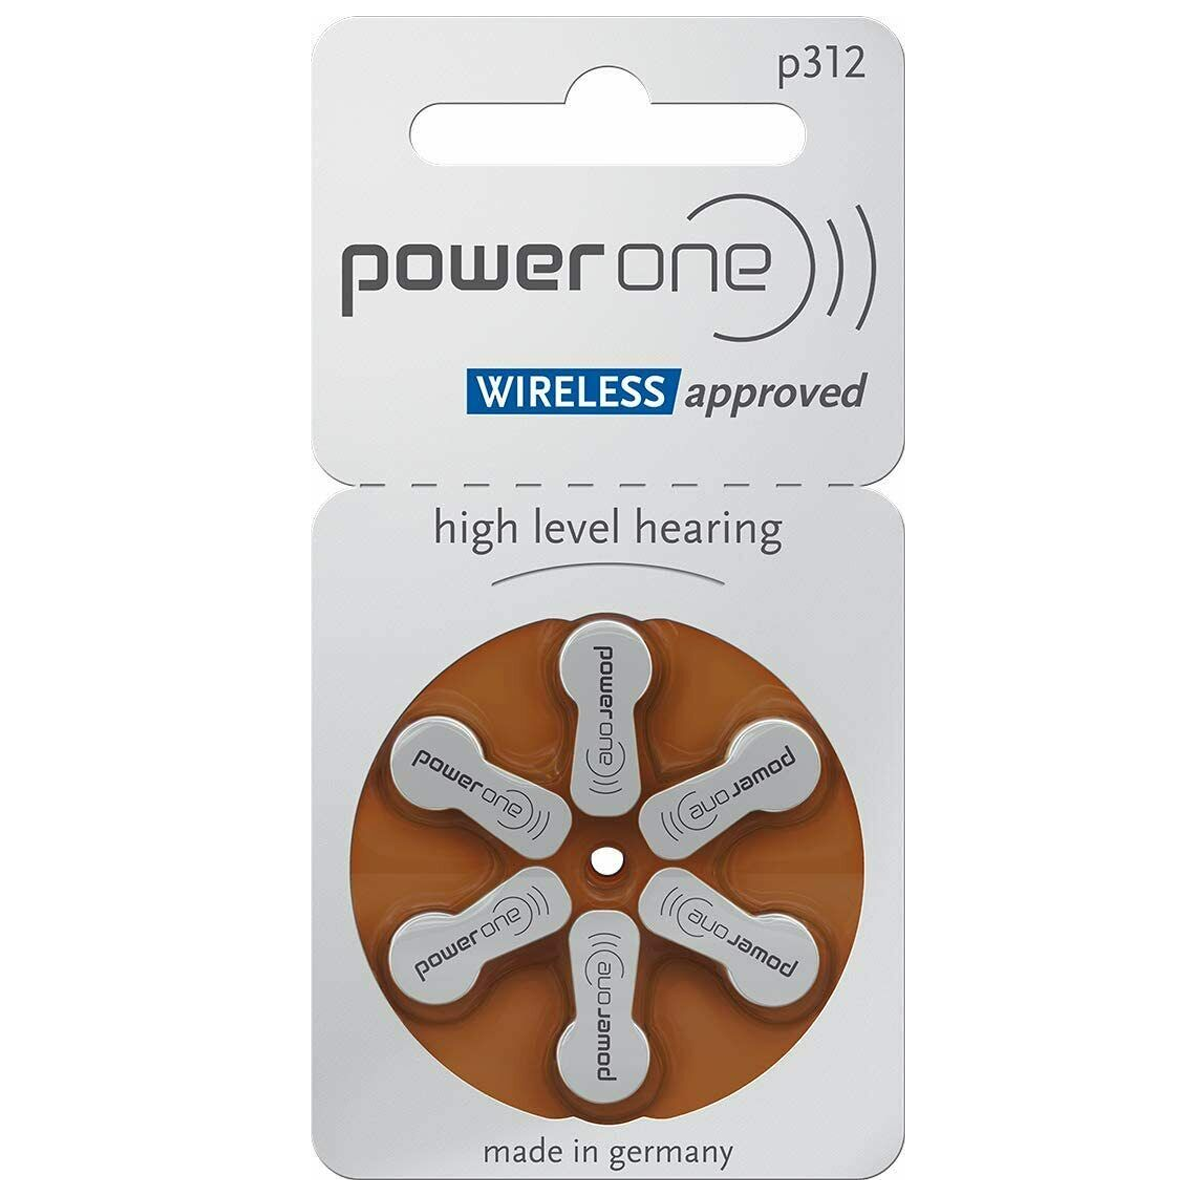 PowerOne Size 312 Hearing Aid Batteries, Multi-Packs from 6 PCS to 300 PCS